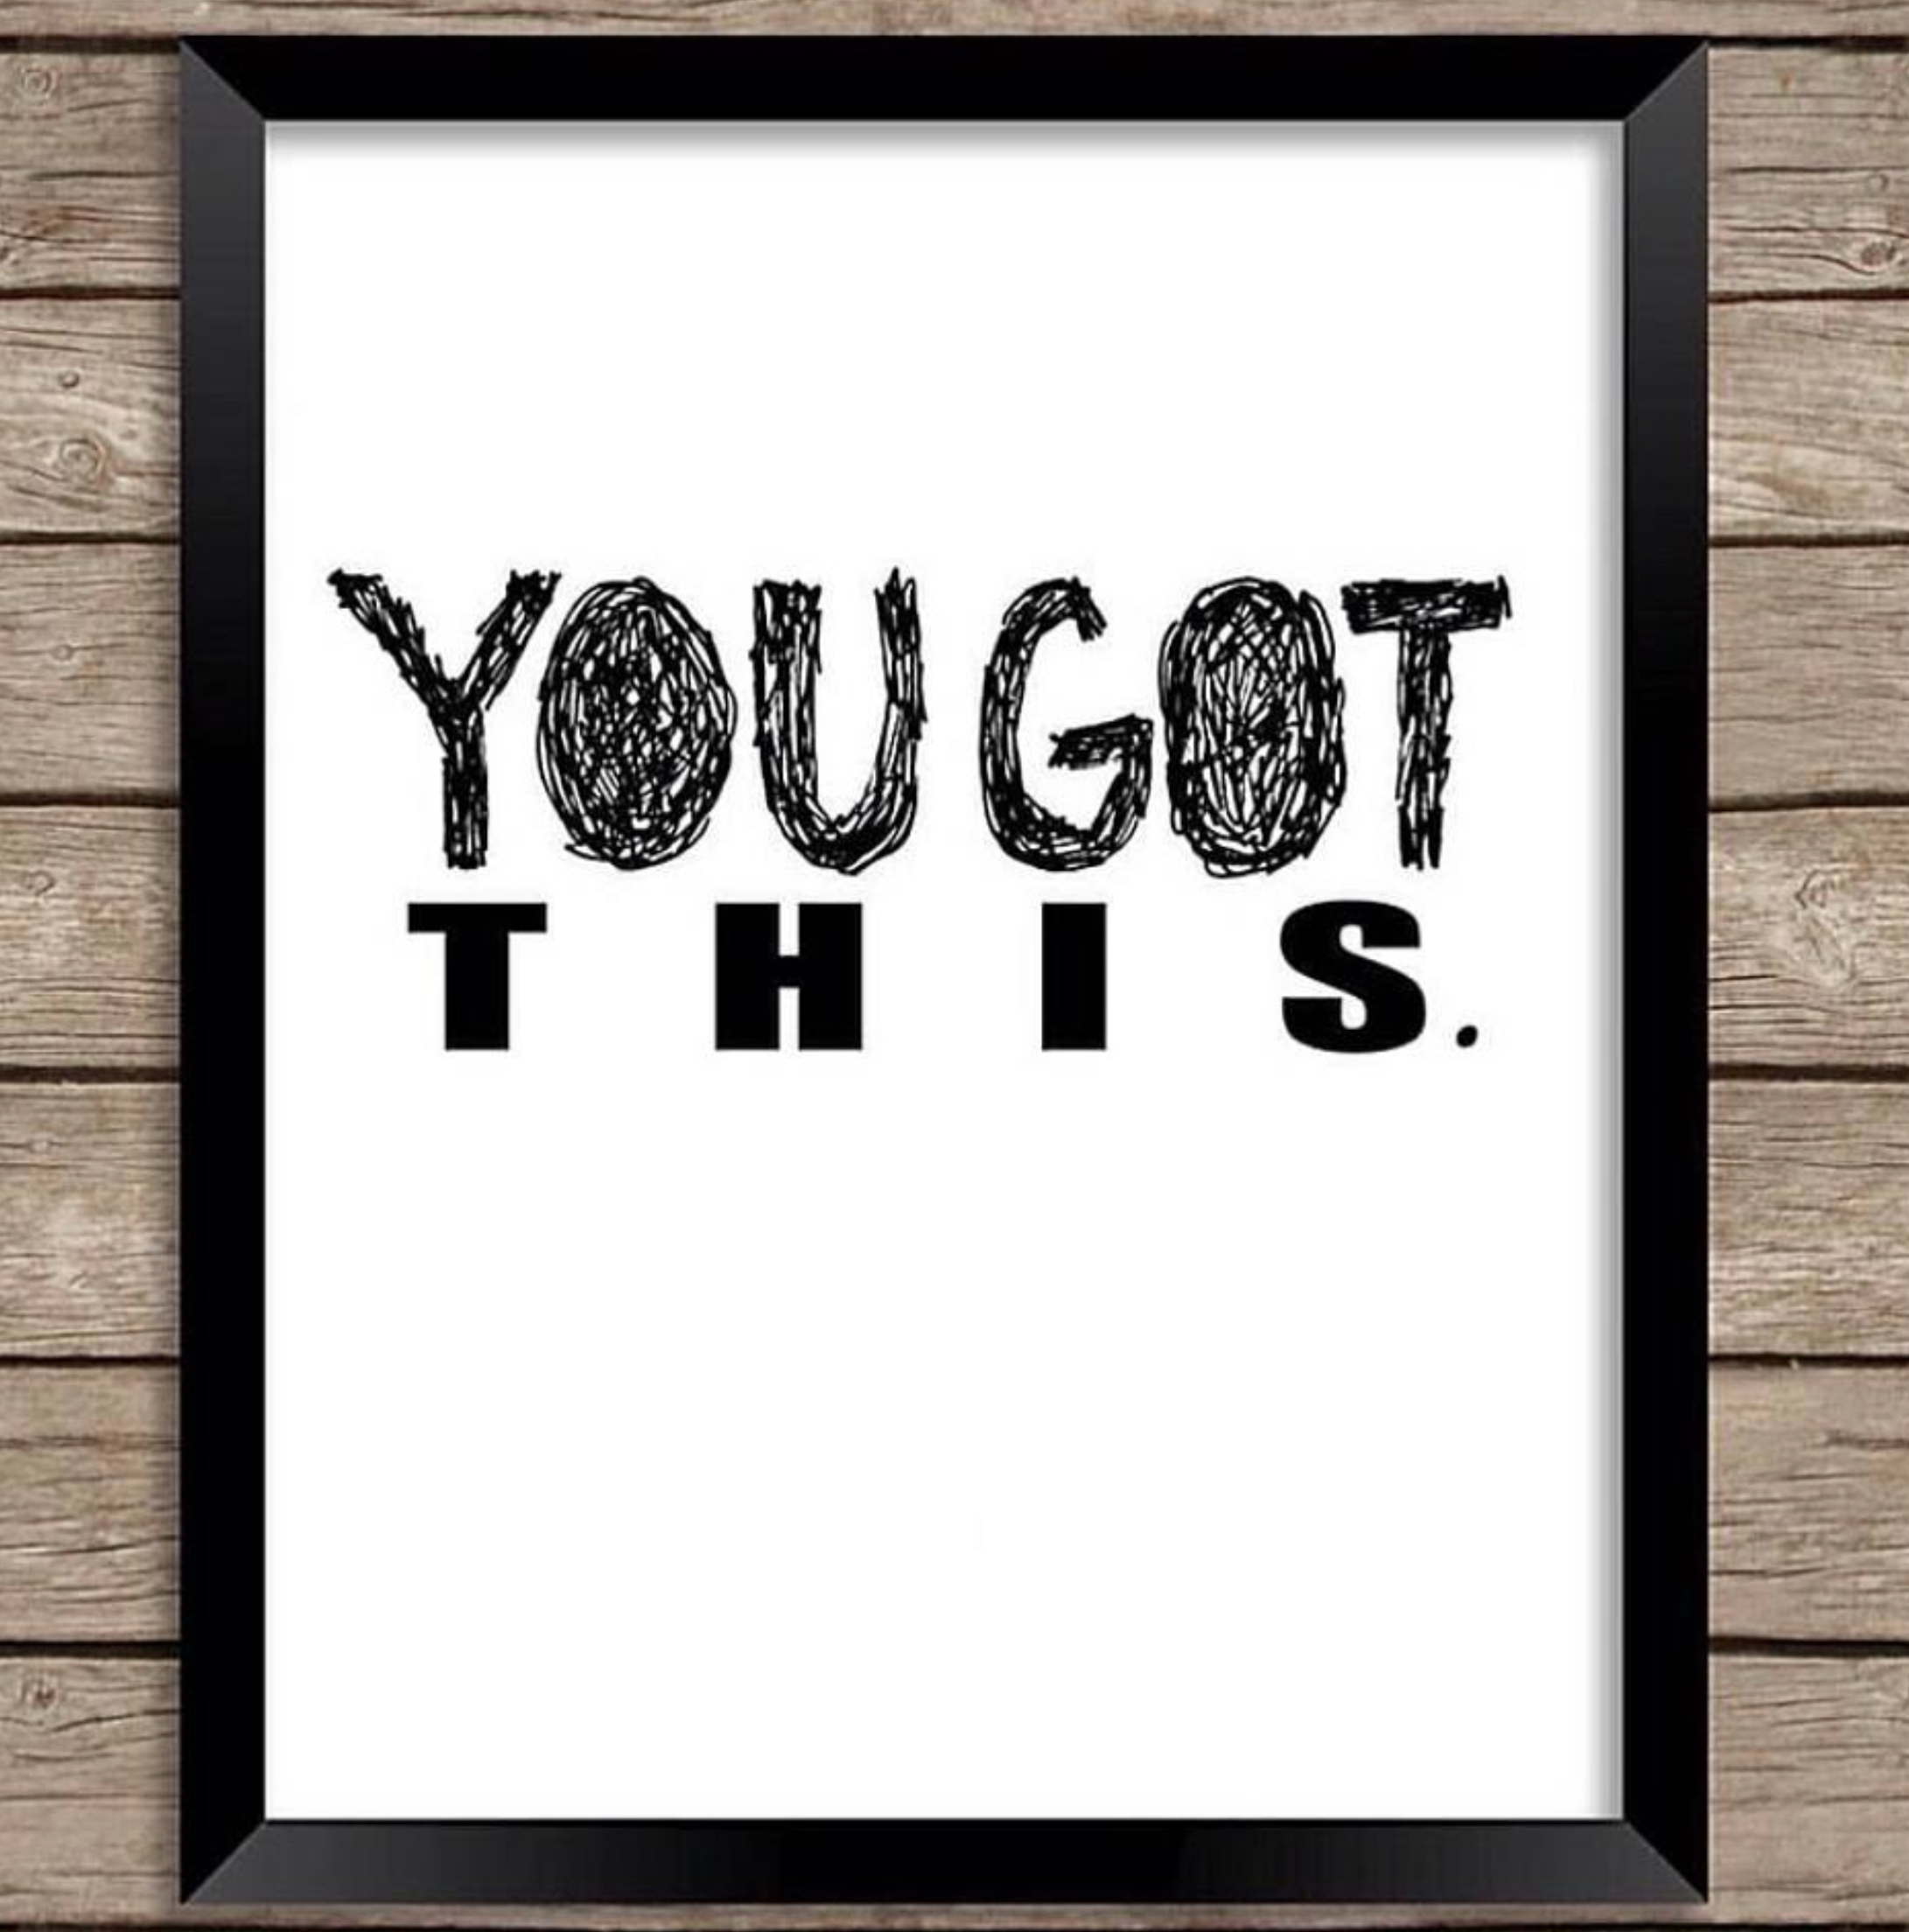 "you got this" framed illustrated print by faith inspired